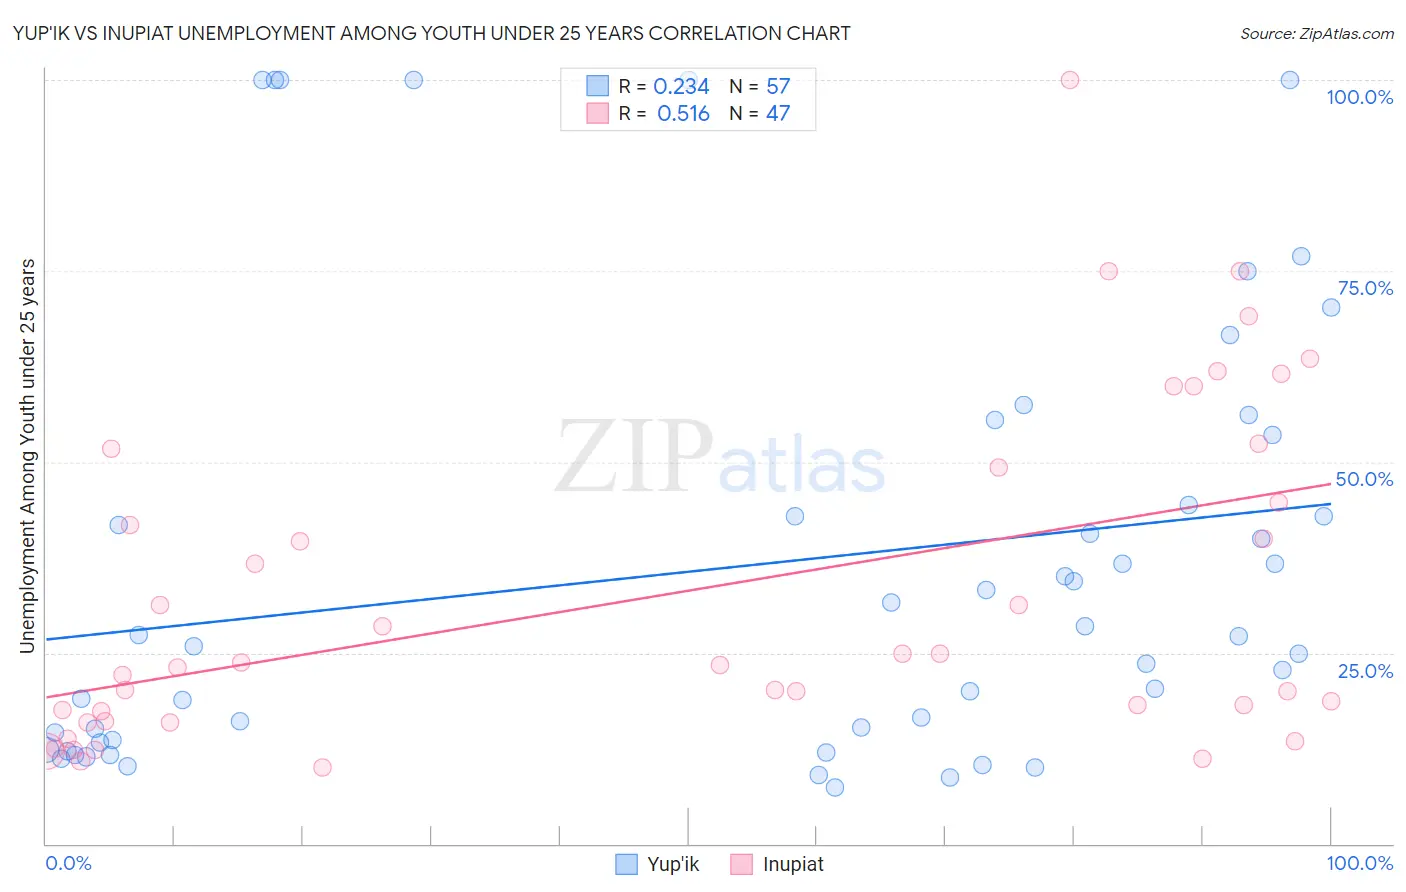 Yup'ik vs Inupiat Unemployment Among Youth under 25 years